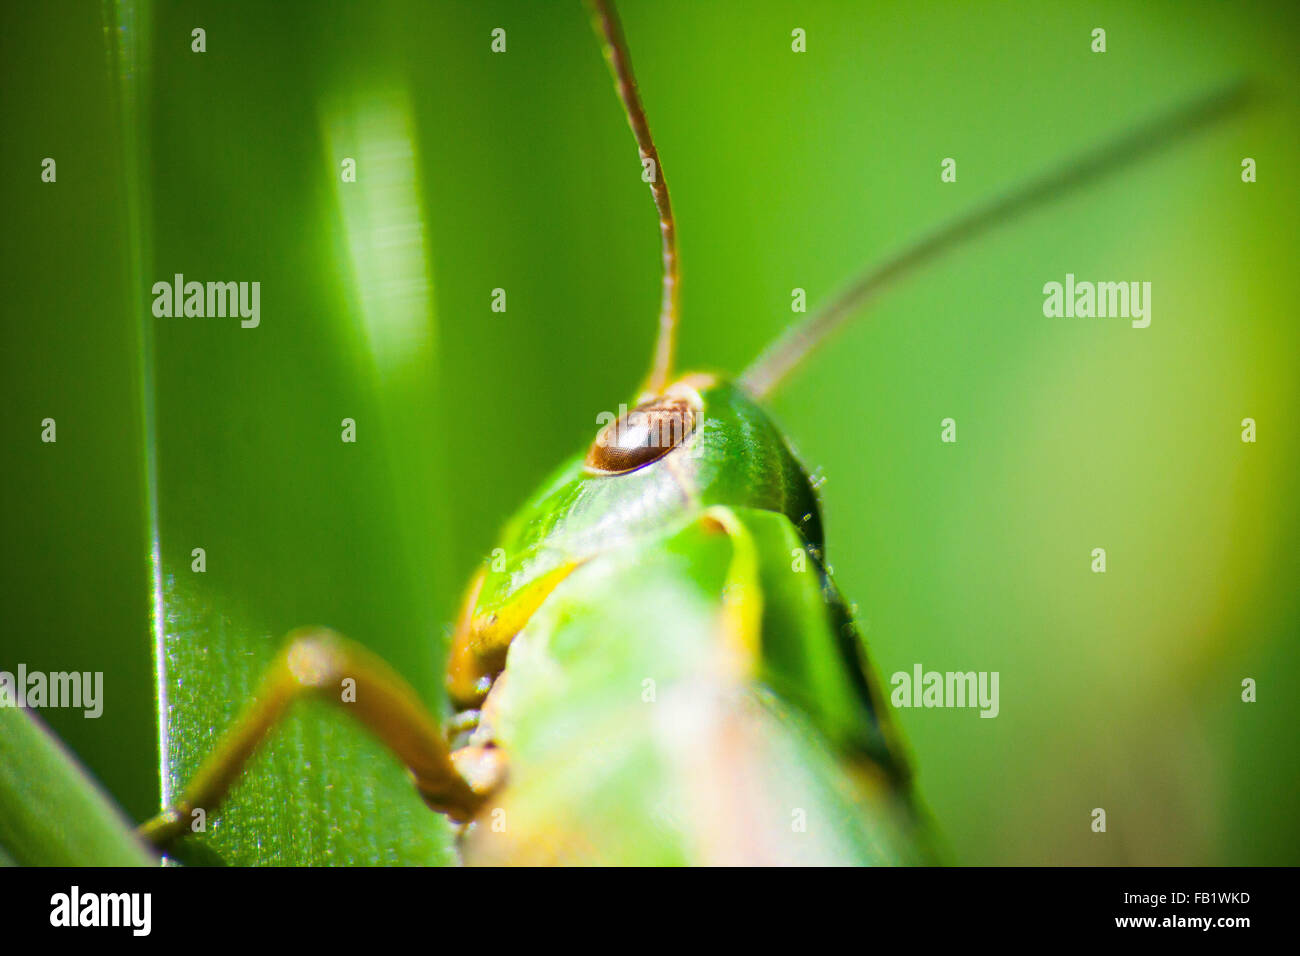 A macro photo of a green grasshopper about to feed on a leave Stock Photo